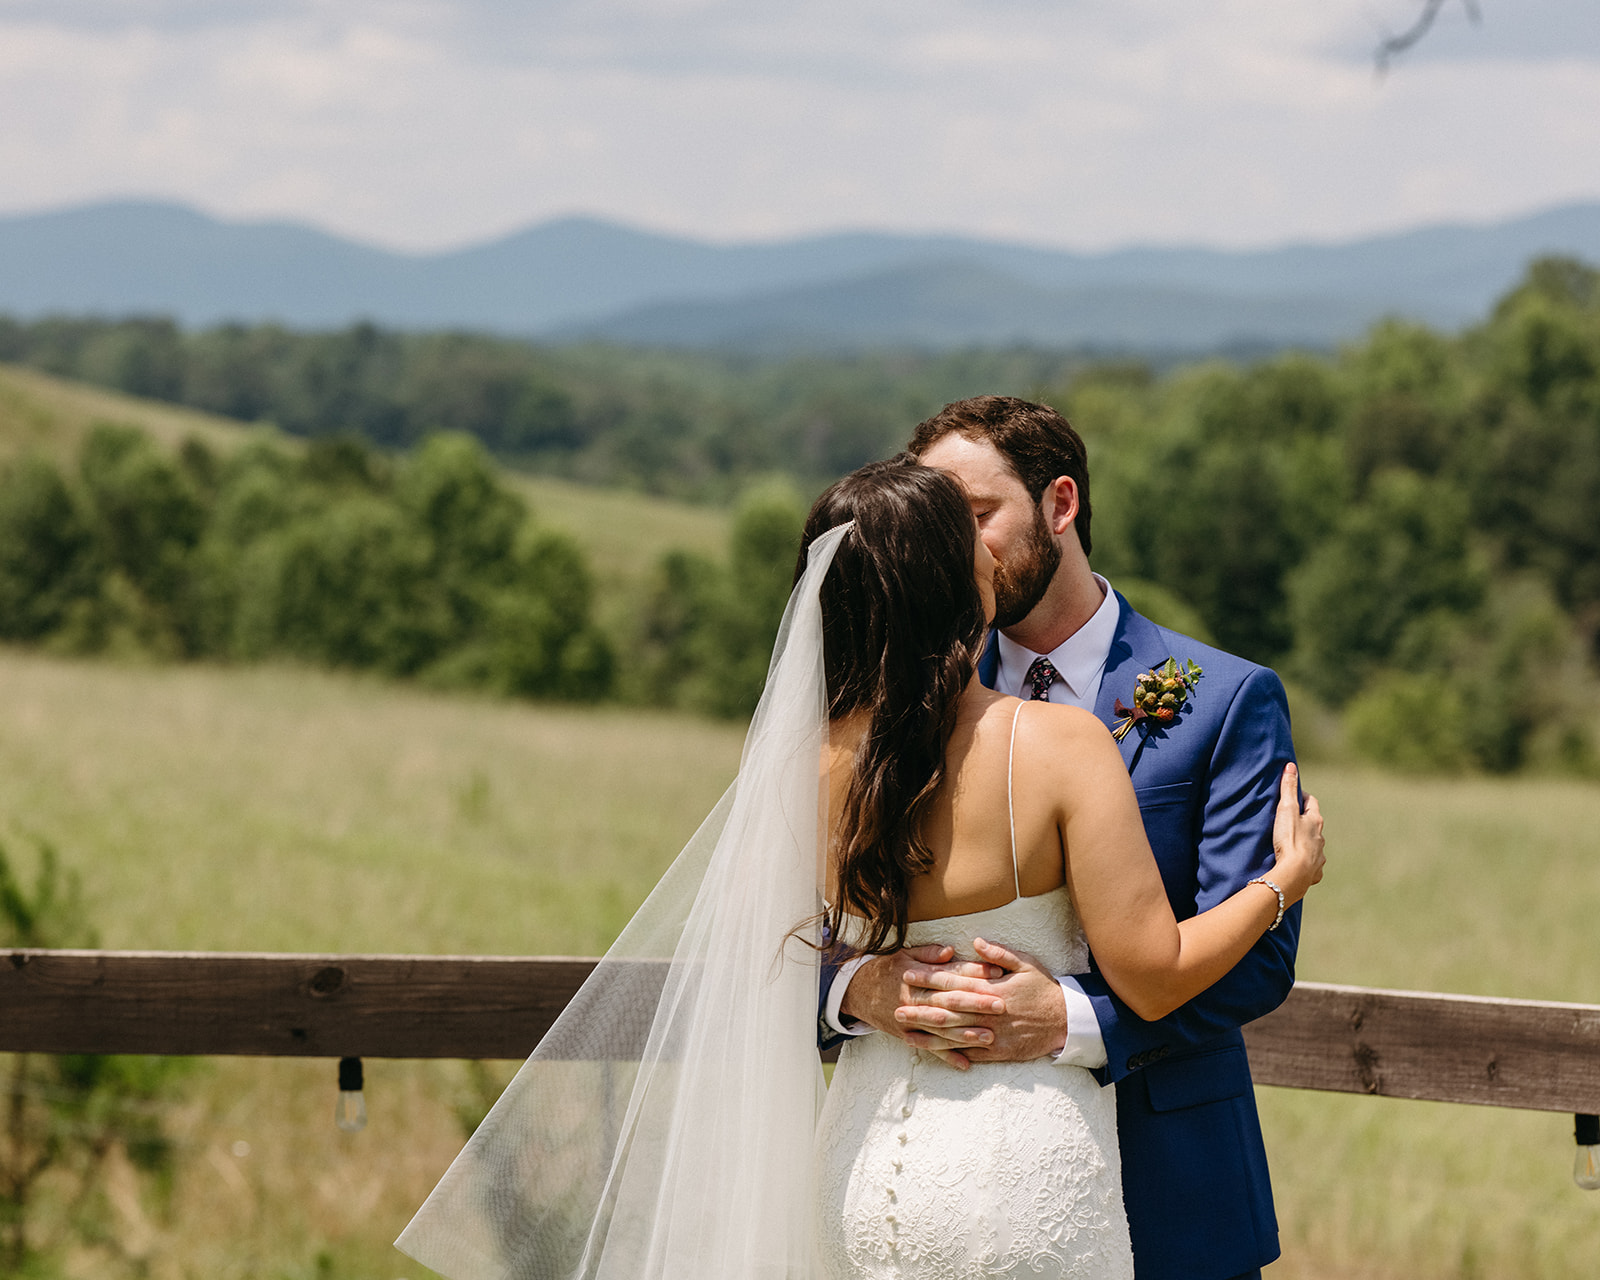 Weston and Sheena's first look outside the chapel, captured by an Atlanta wedding photographer